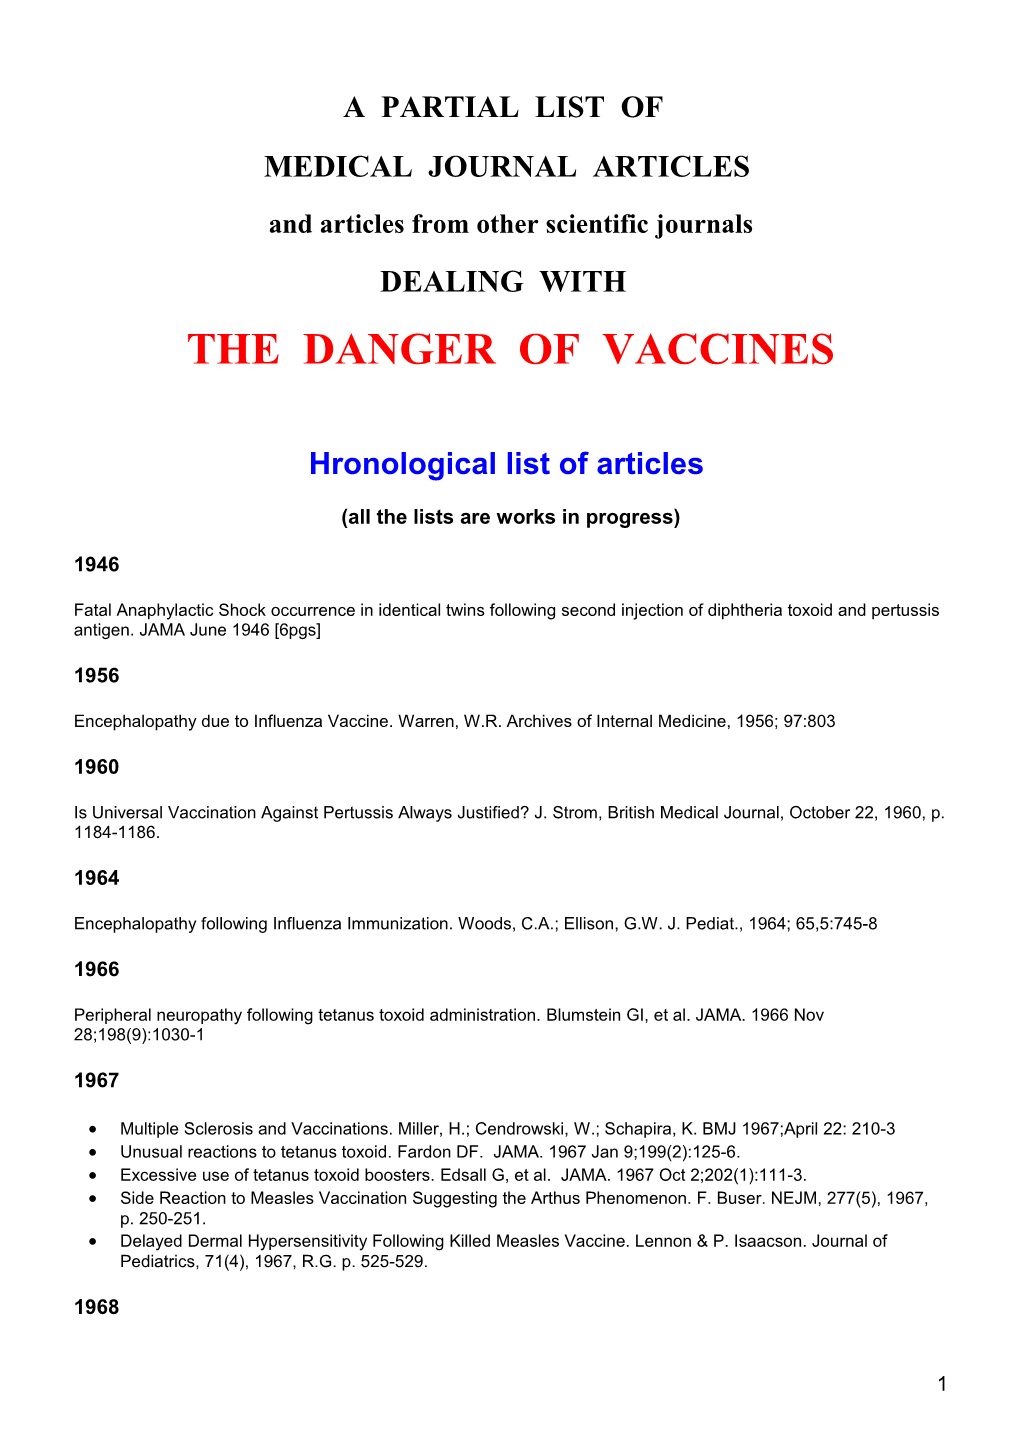 A Partial List of Medical Journal Articles